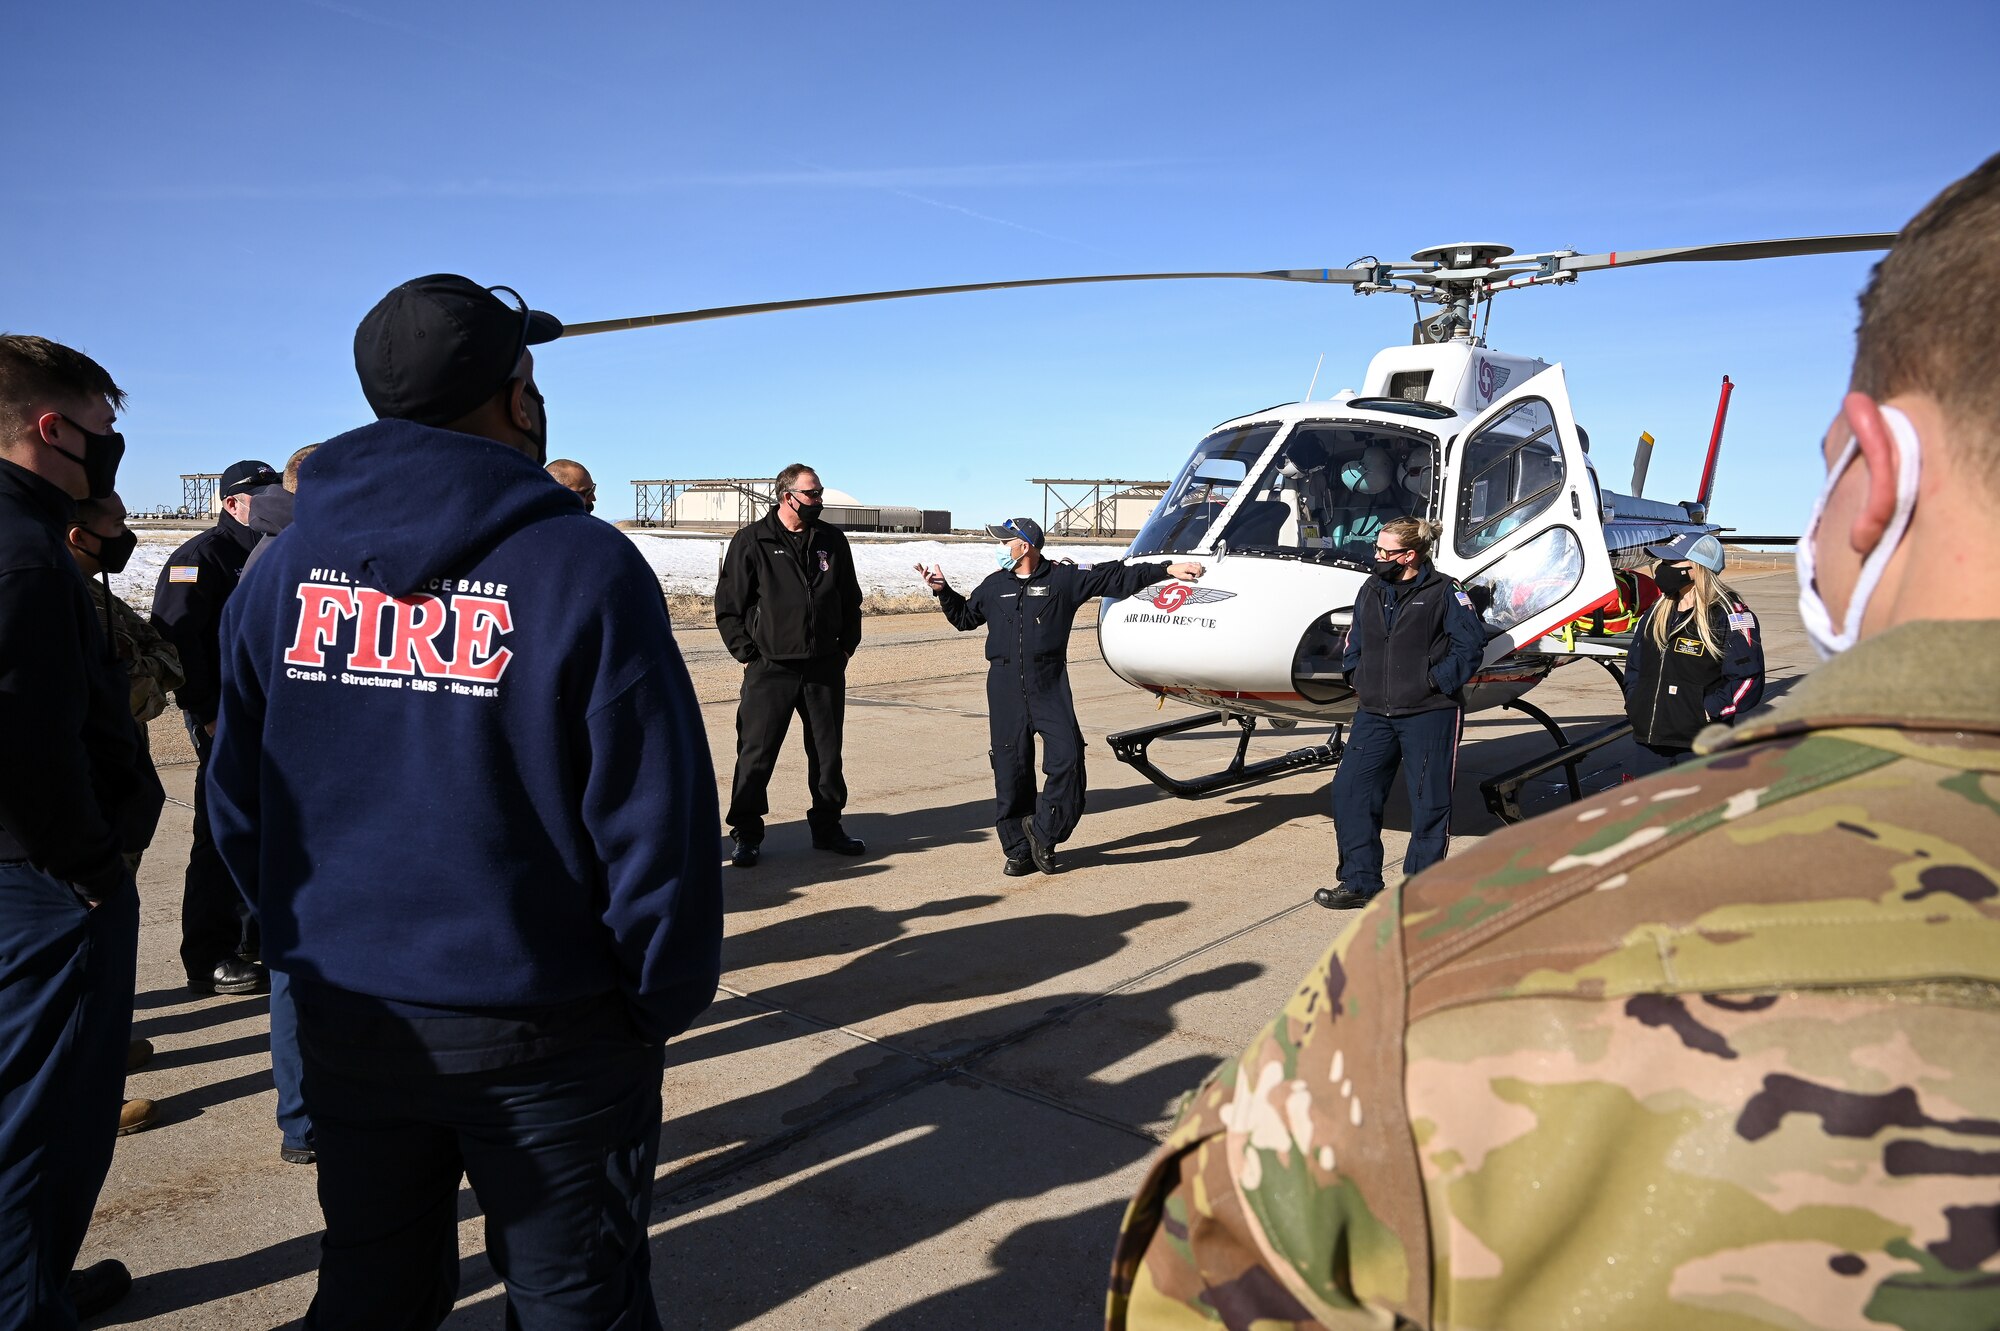 An AirLife Utah crew speaks with Hill firefighters during an air ambulance training event at Hill Air Force Base, Utah, Jan. 14. 2021. Hill's first responders conduct the annual training to remain proficient on air ambulance operations. The Ogden AirLife Utah base is located at Ogden Regional Medical Center. (U.S. Air Force photo by R. Nial Bradshaw)